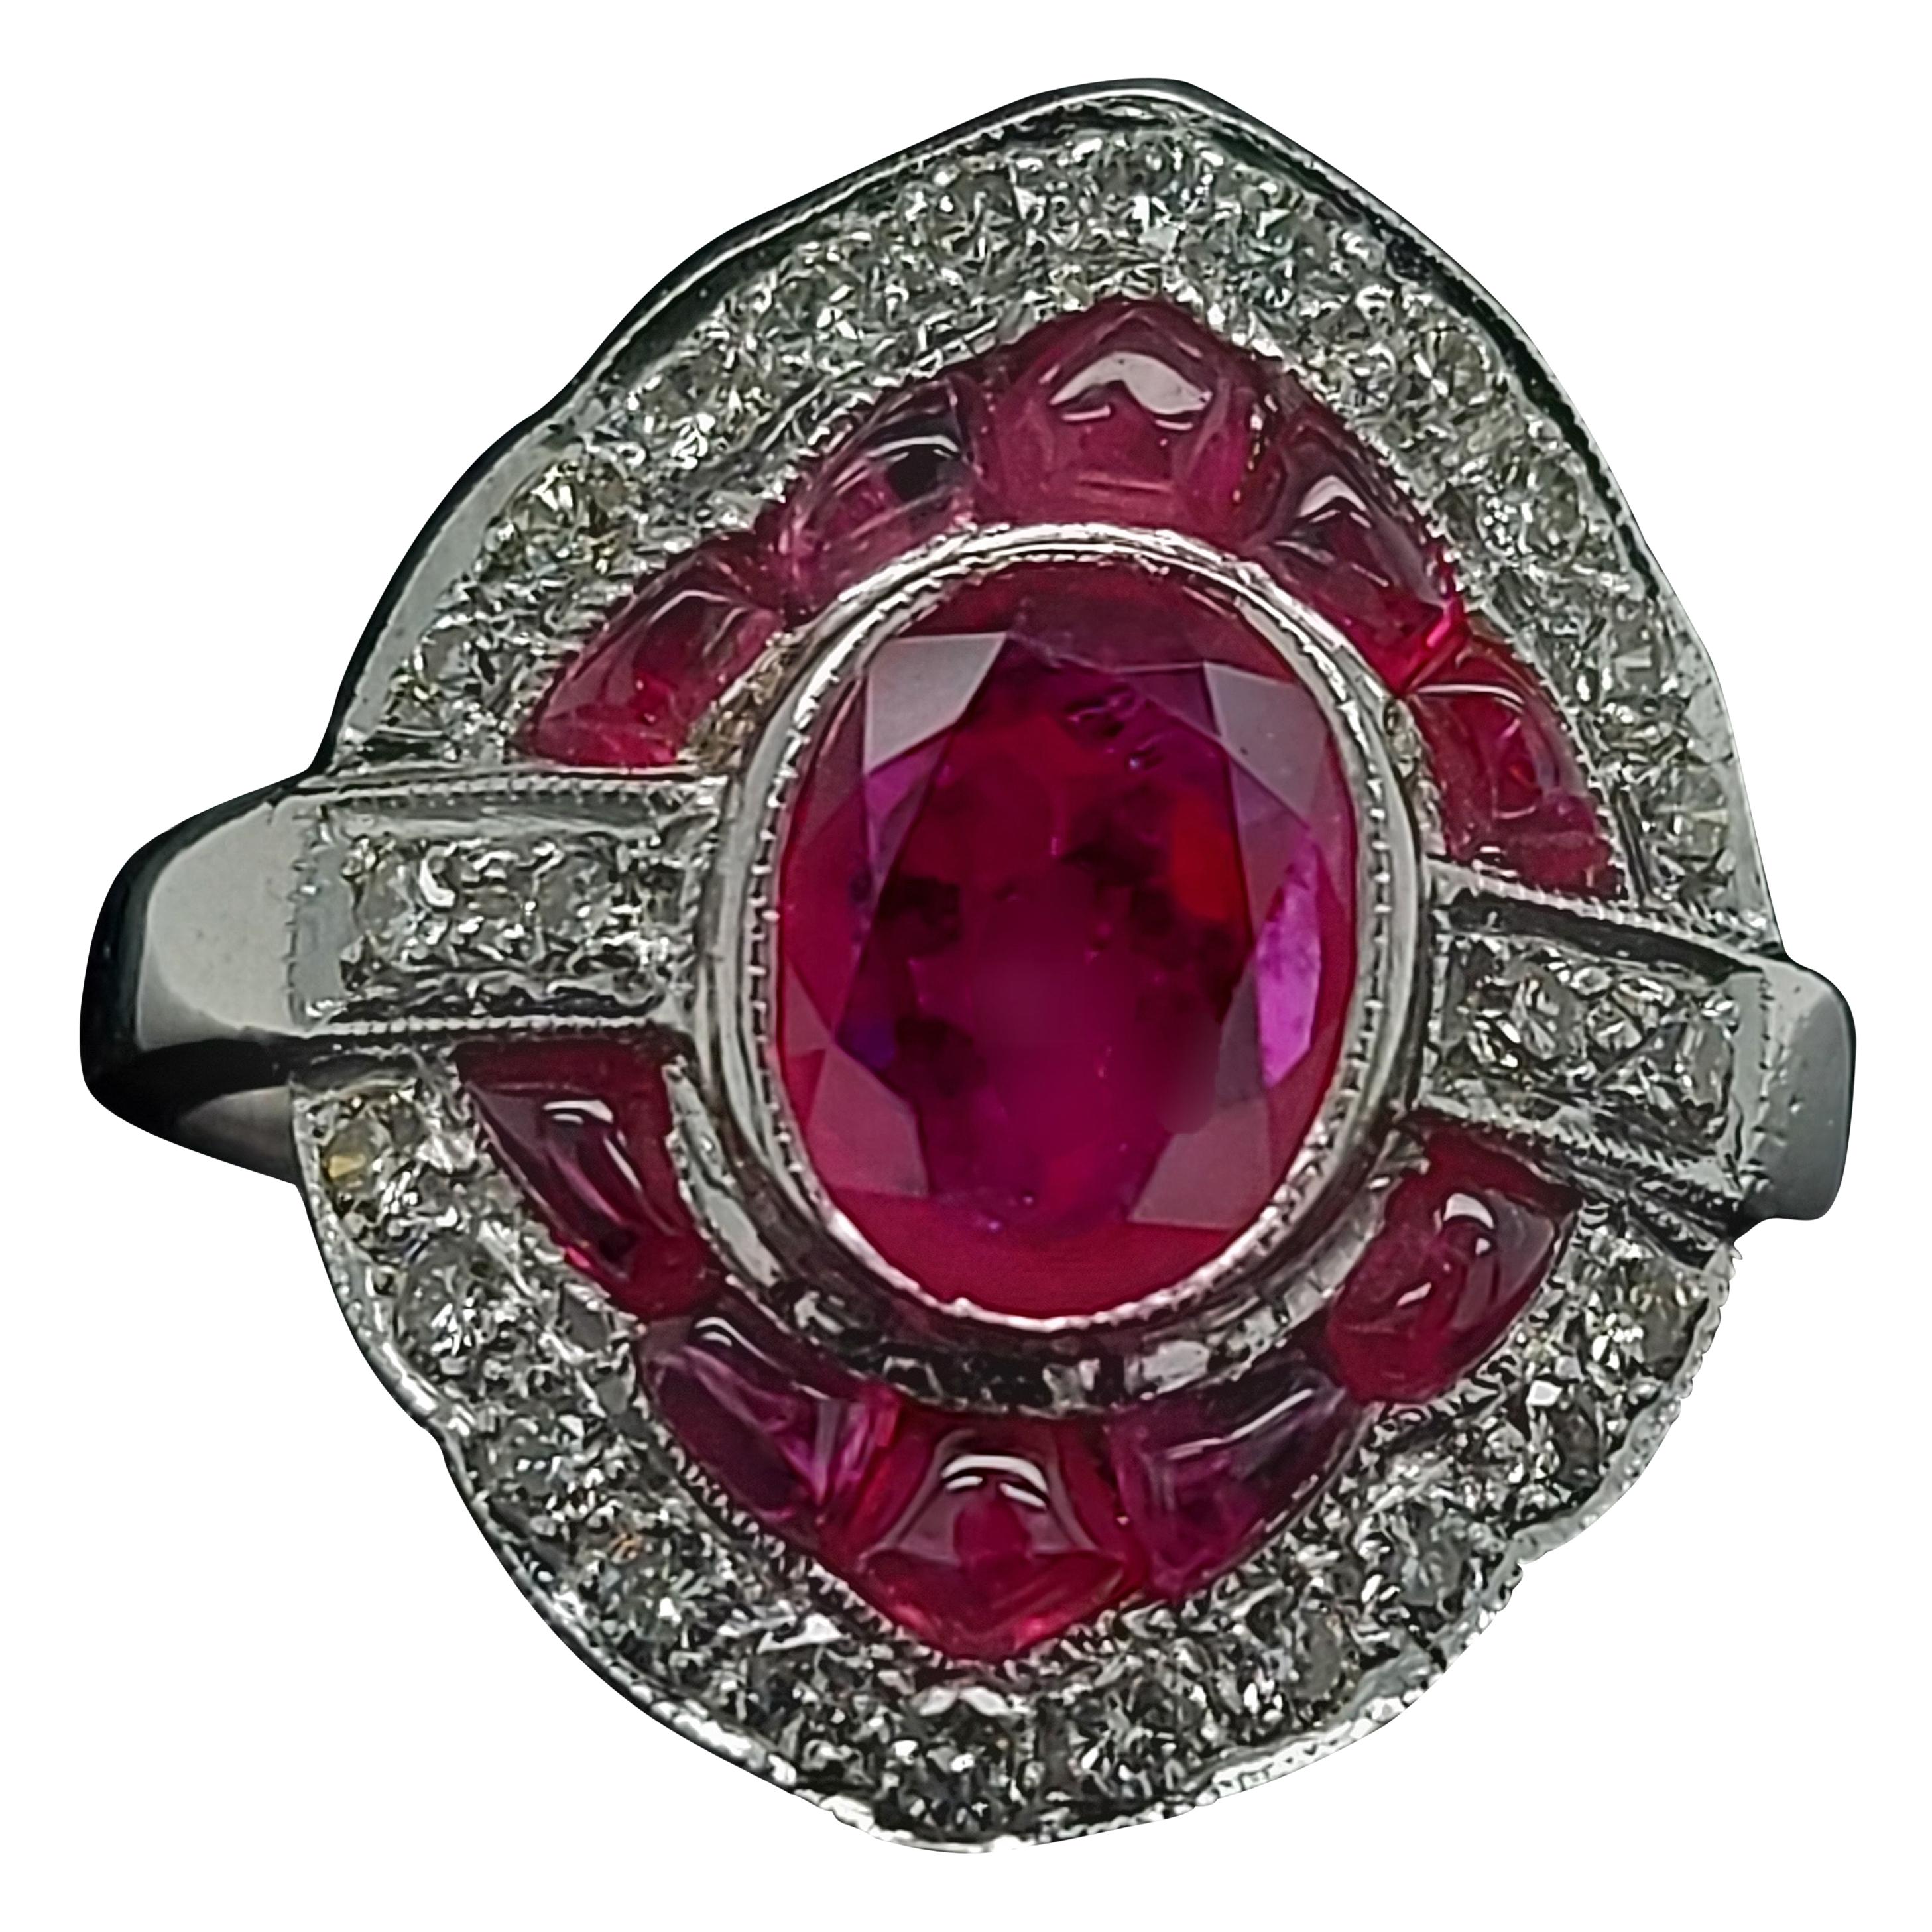 Stunning 18 Karat White Gold Ring with Rubies and Brilliant Cut Diamonds For Sale